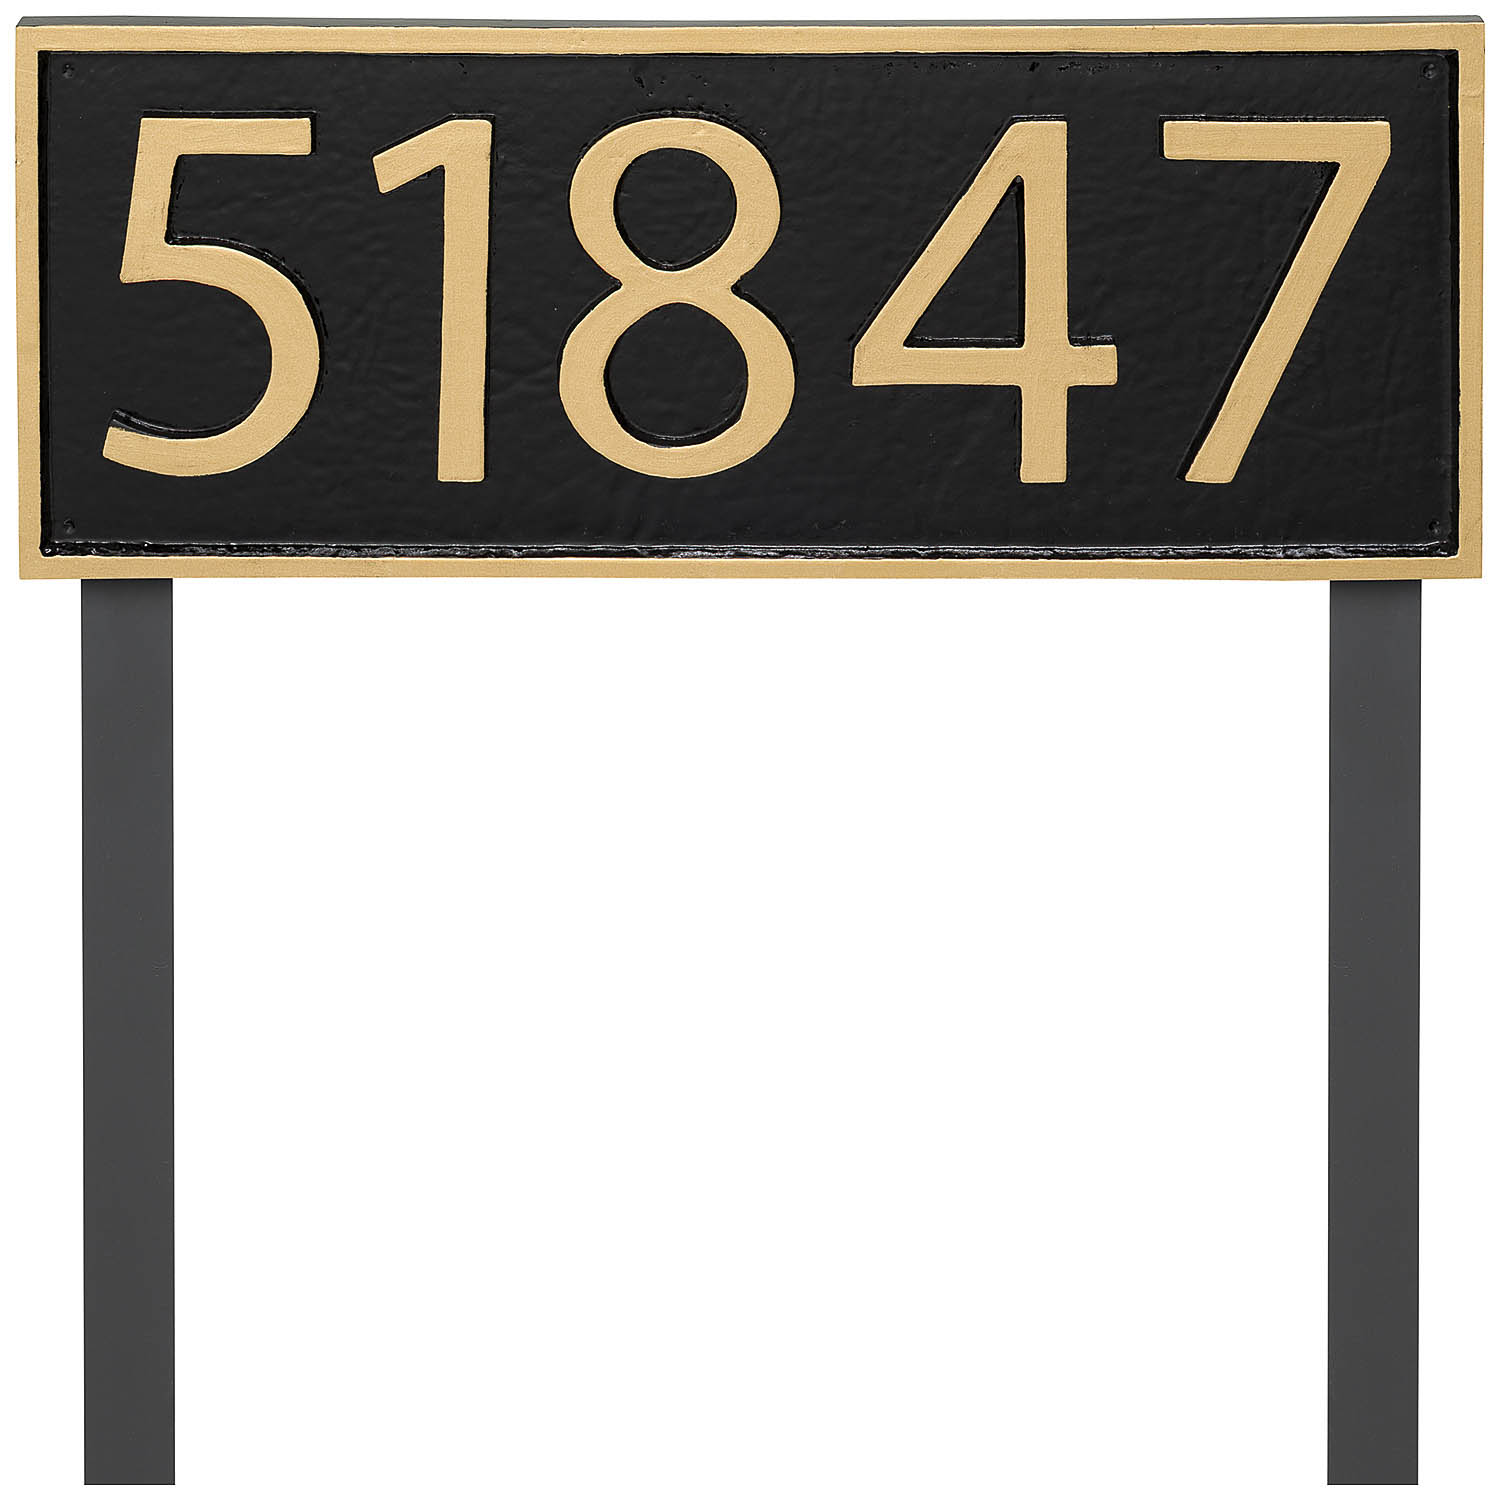 Rectangle Modern Economy Address Plaque (holds up to 5 characters)